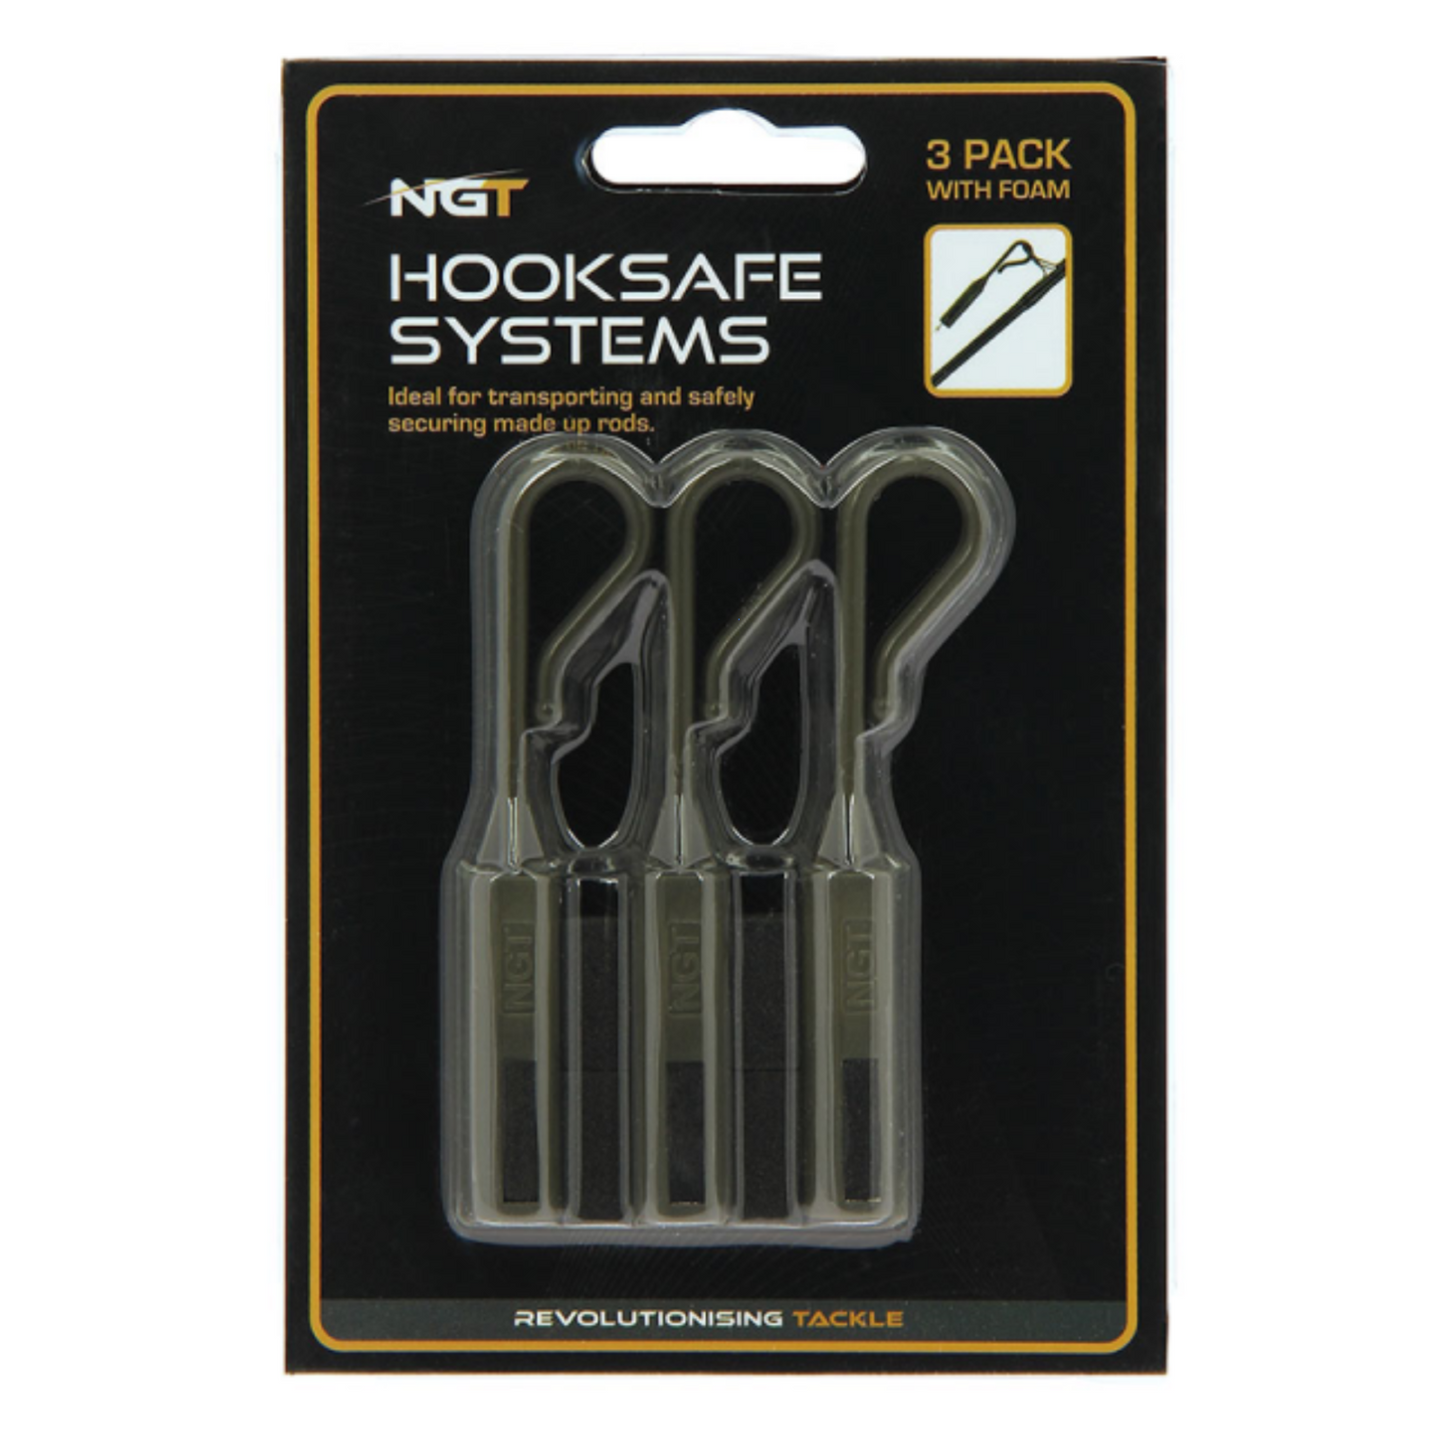 NGT Hooksafe Made Up Rod Systems - 3 Pack in Green